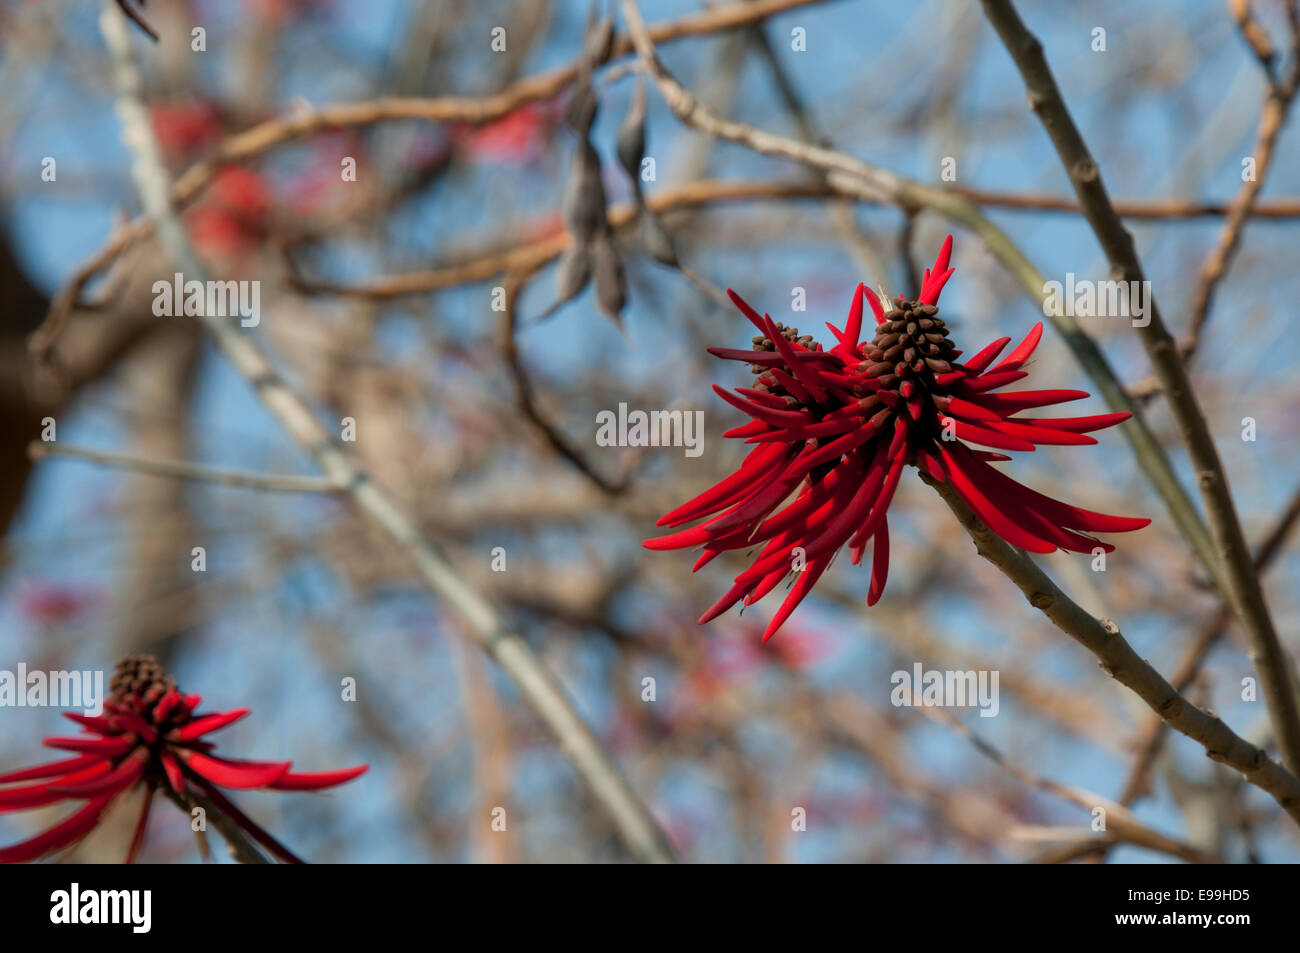 Red flowers of a Erythrina tree taken in Mexico, Stock Photo